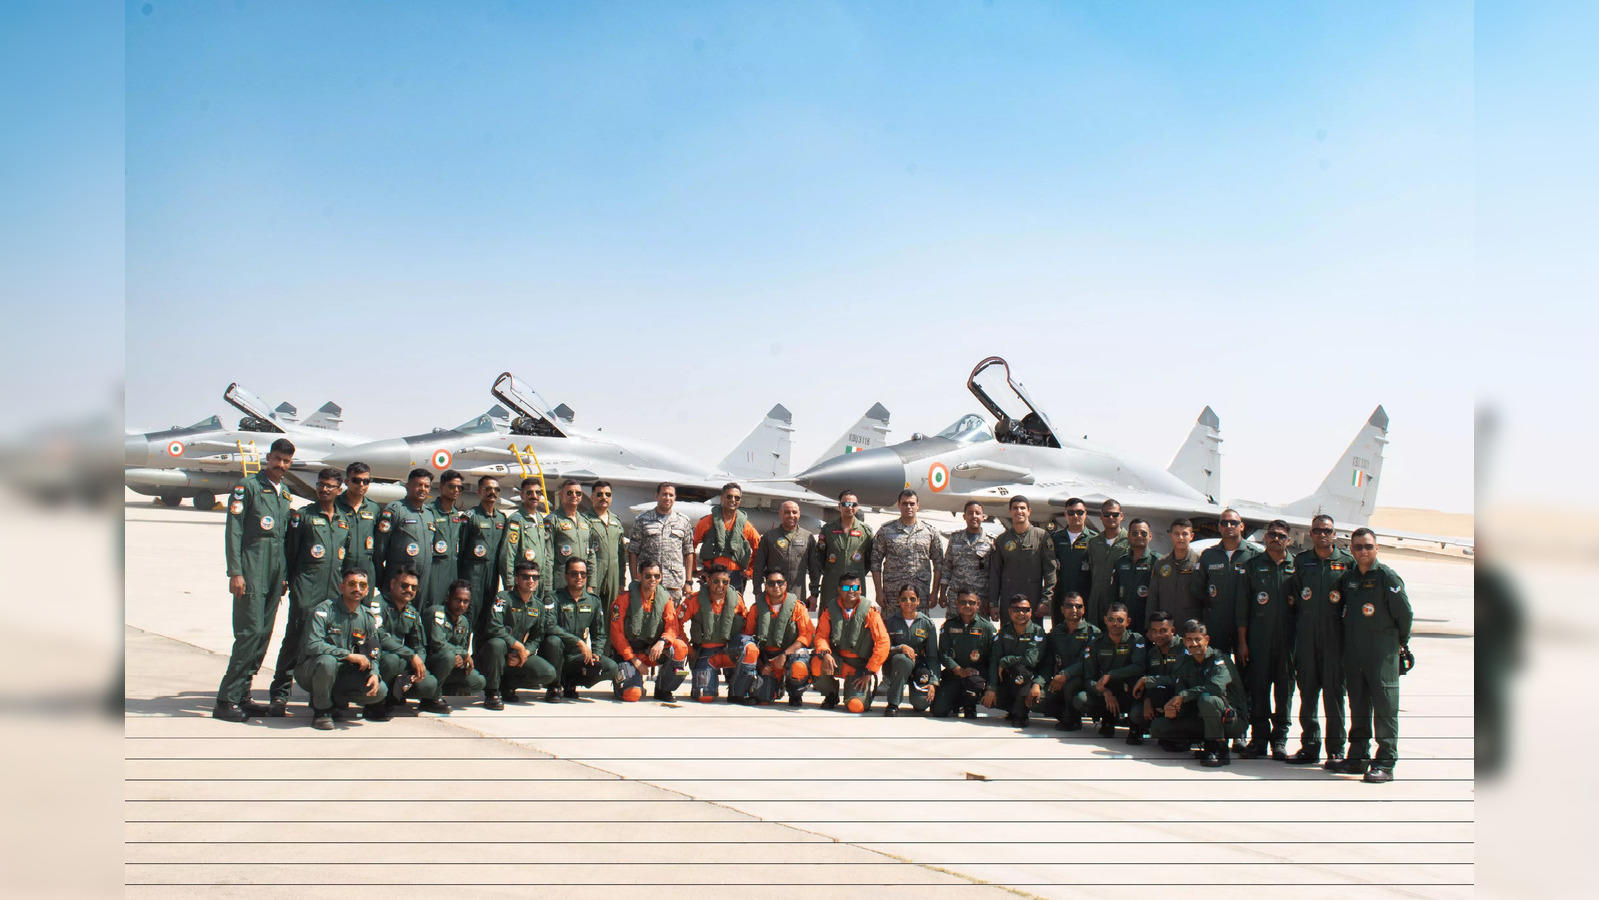 iaf: Indian Air Force contingent reaches Egypt to participate in  Multilateral tri-service exercise - The Economic Times